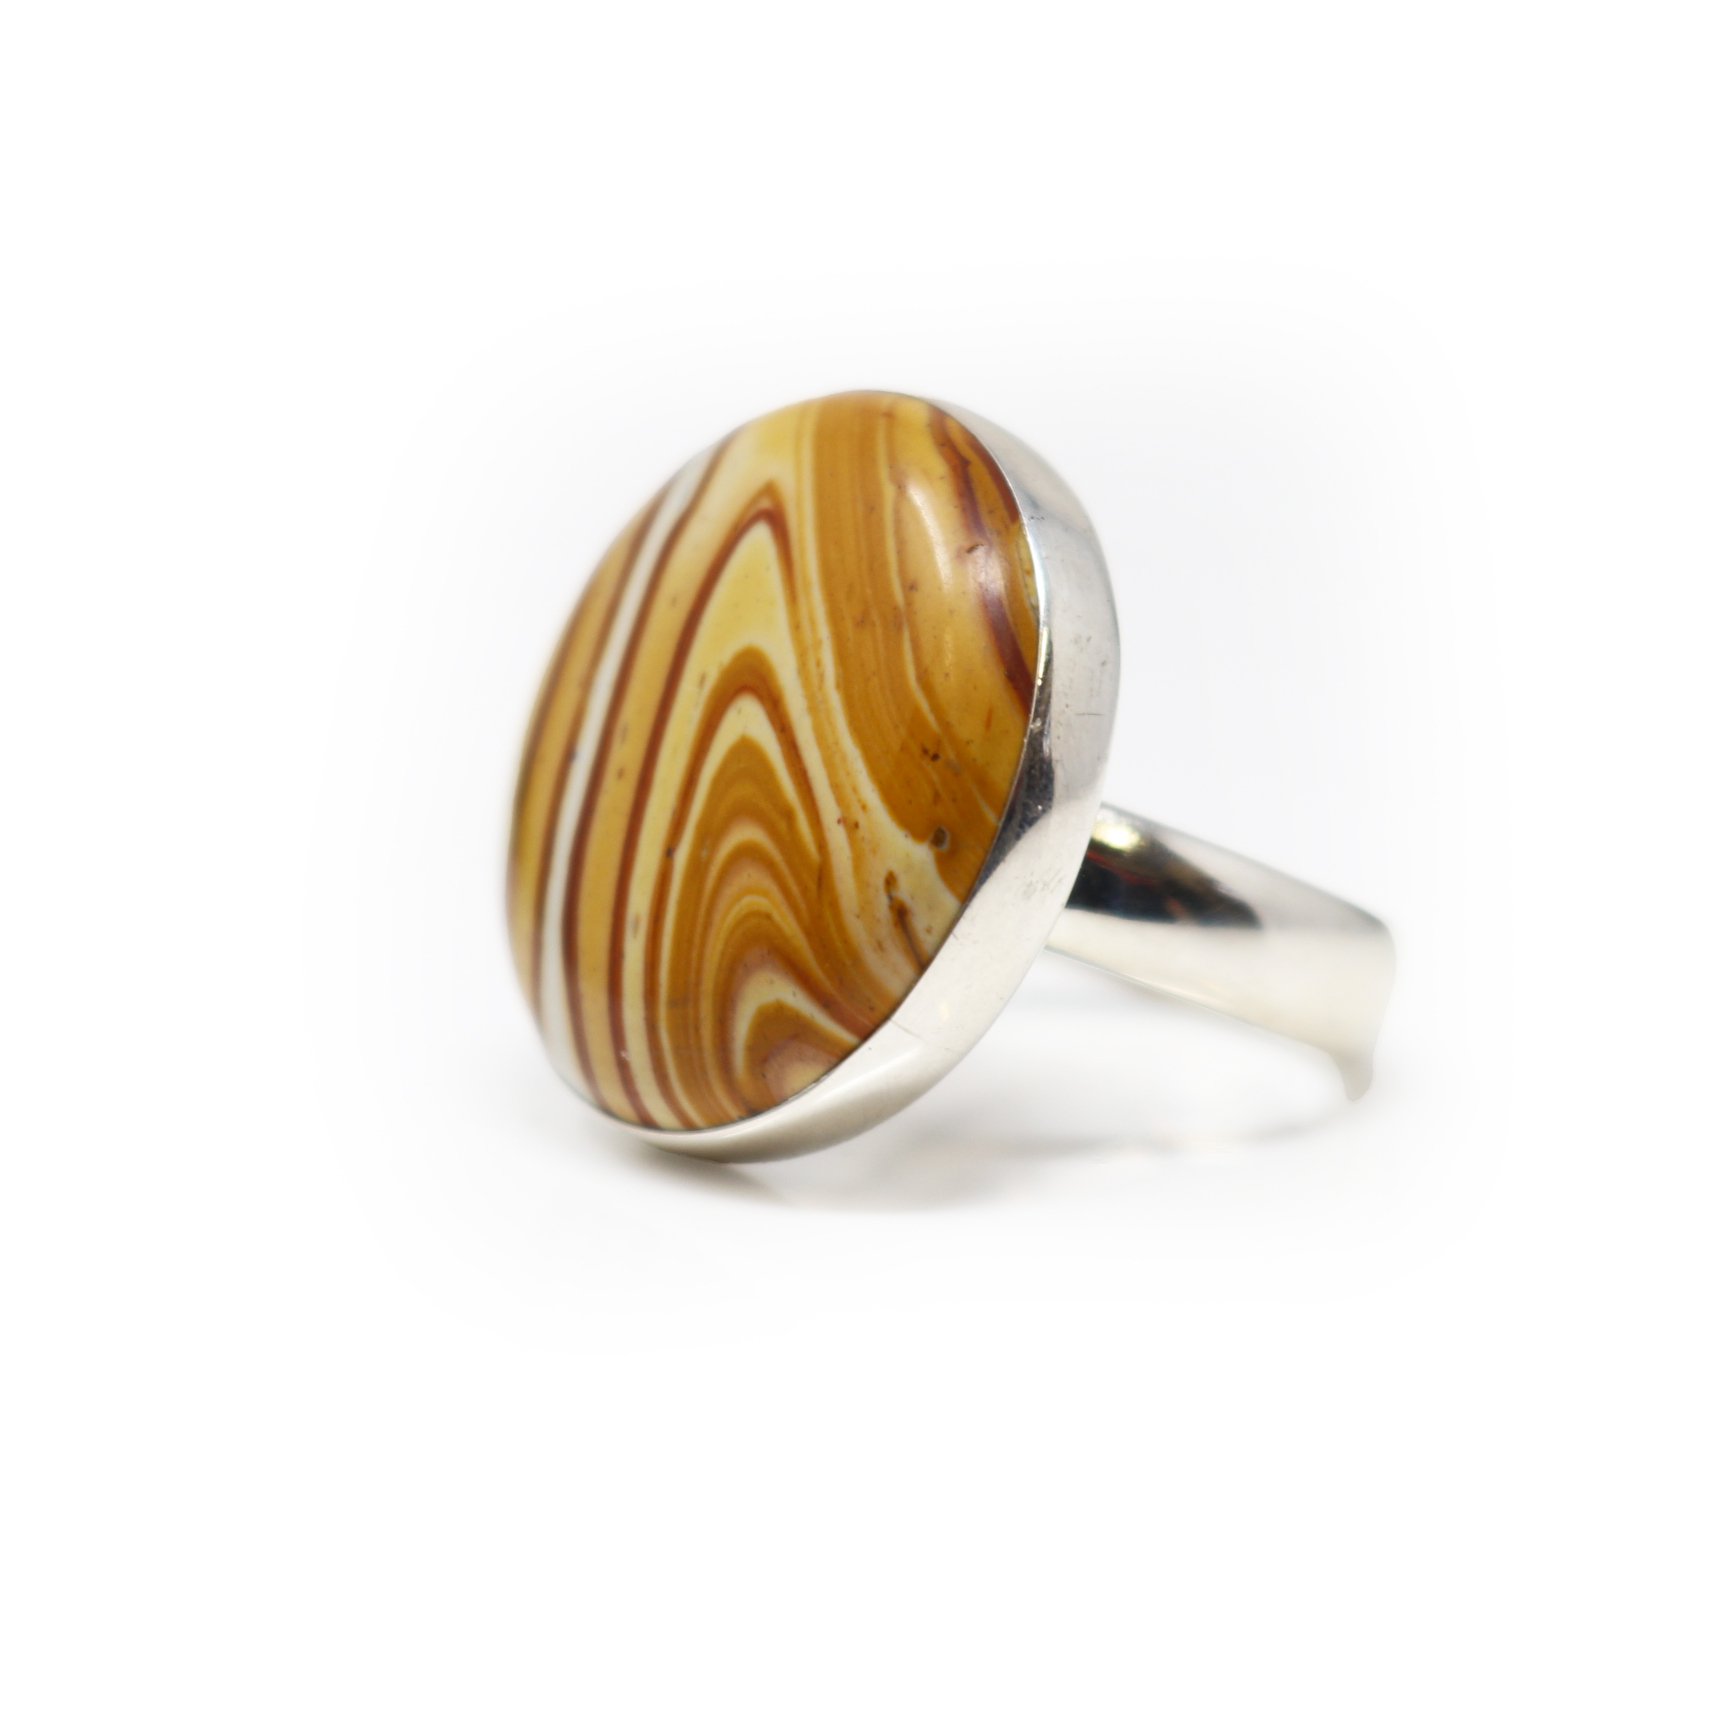 Willow Creek Jasper Ring - Simple Round Cabochon With 925 Sterling Silver Bezel & Band - Deep Red Banding With Cream & Tan Hues Sz6